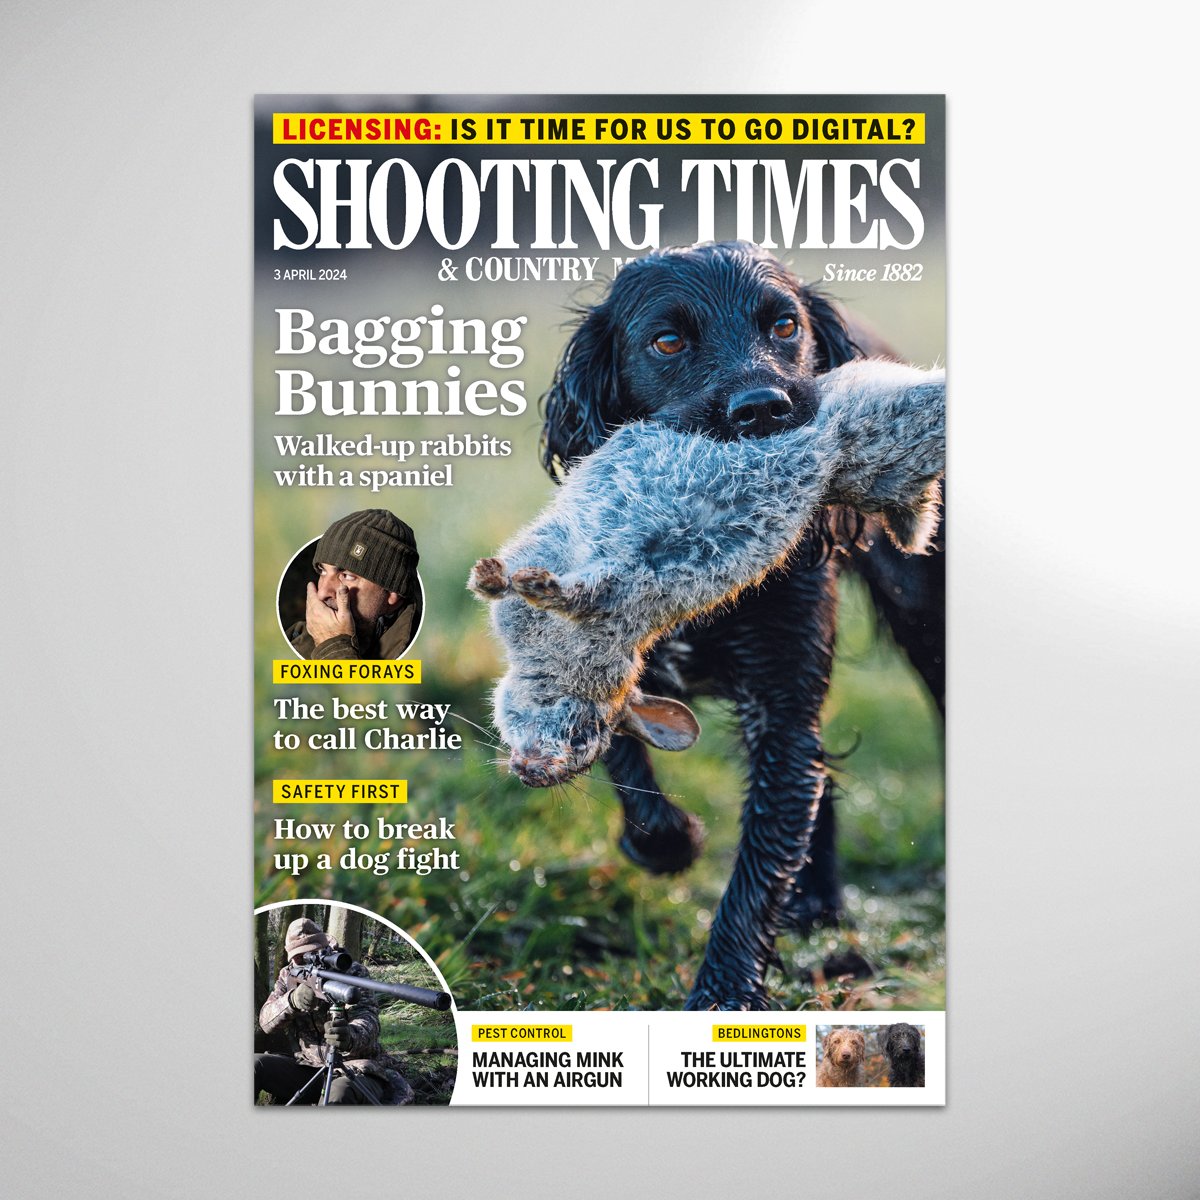 The latest issue of Shooting Times is out now! This week, rabbits are nowhere near as abundant now, thanks to myxomatosis and rabbit haemorrhage disease, but there are a few around for a determined Gun and dog, says Simon Garnham. Laurence Catlow wonders why does shooting